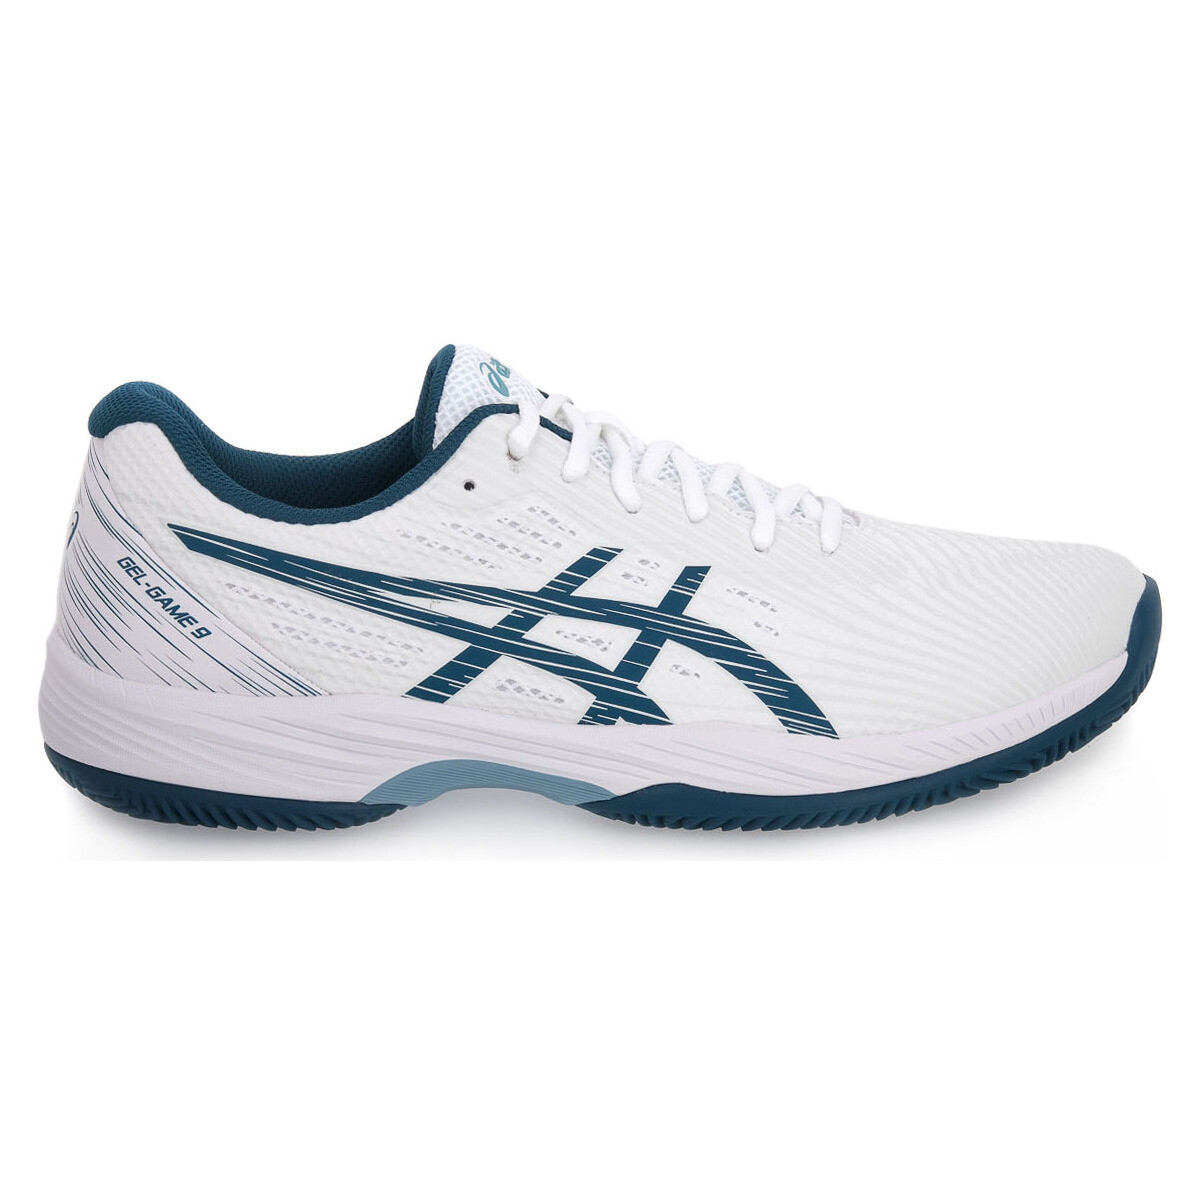 Fitness Asics 102 GEL GAME 9 CLAY